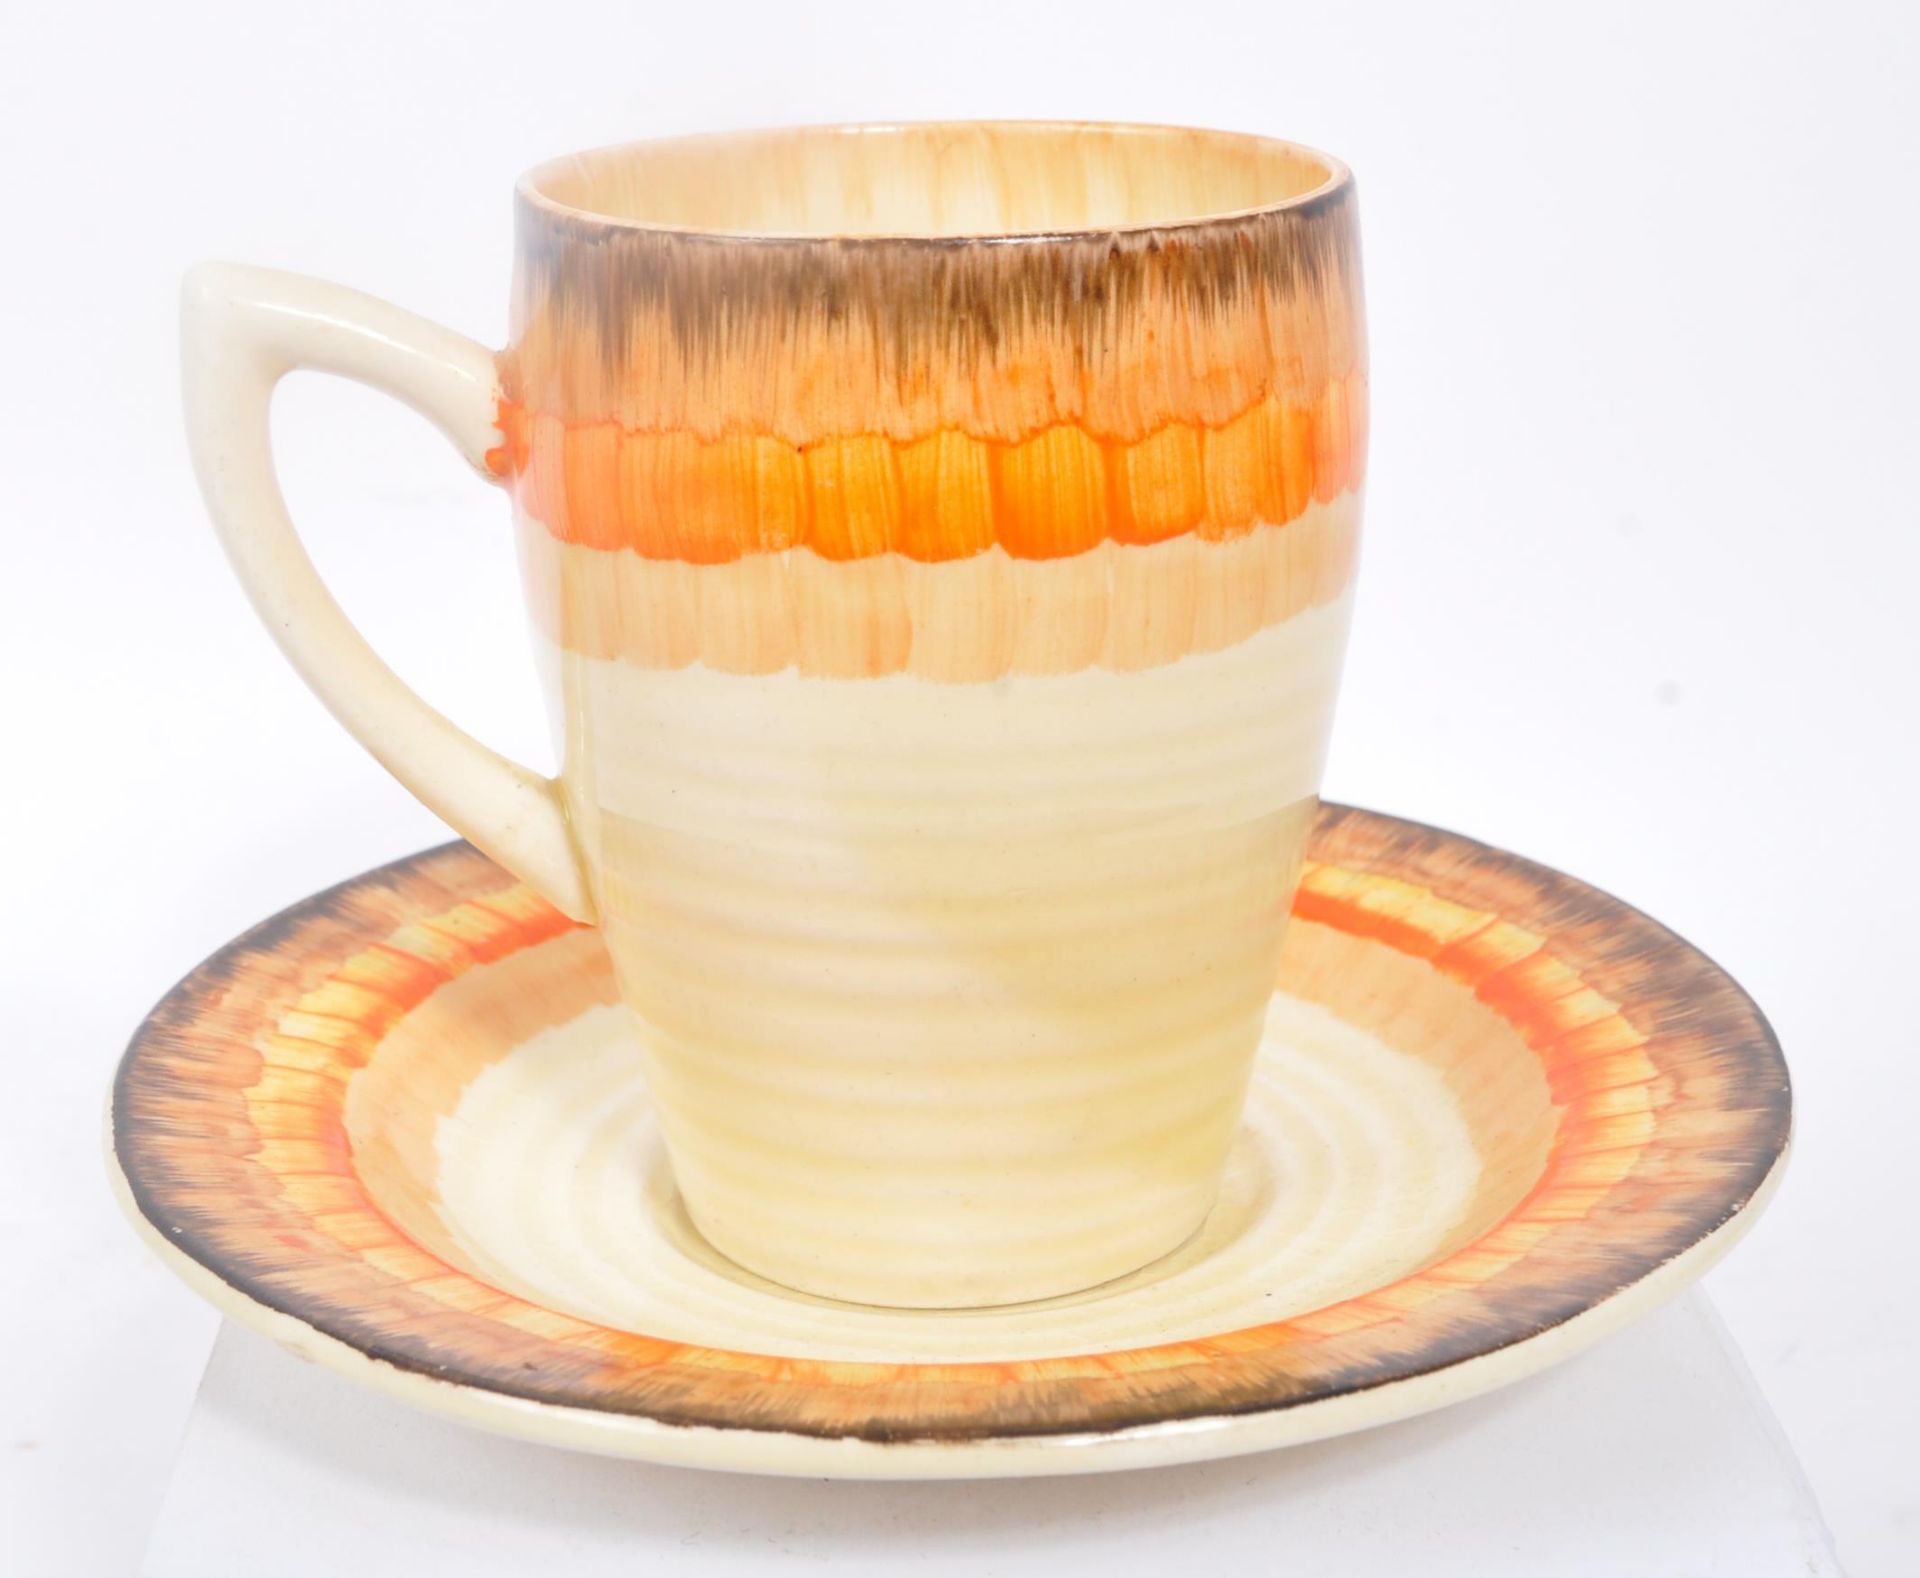 CLARICE CLIFF - 1930S ART DECO TEACUP AND SAUCER - Image 3 of 8